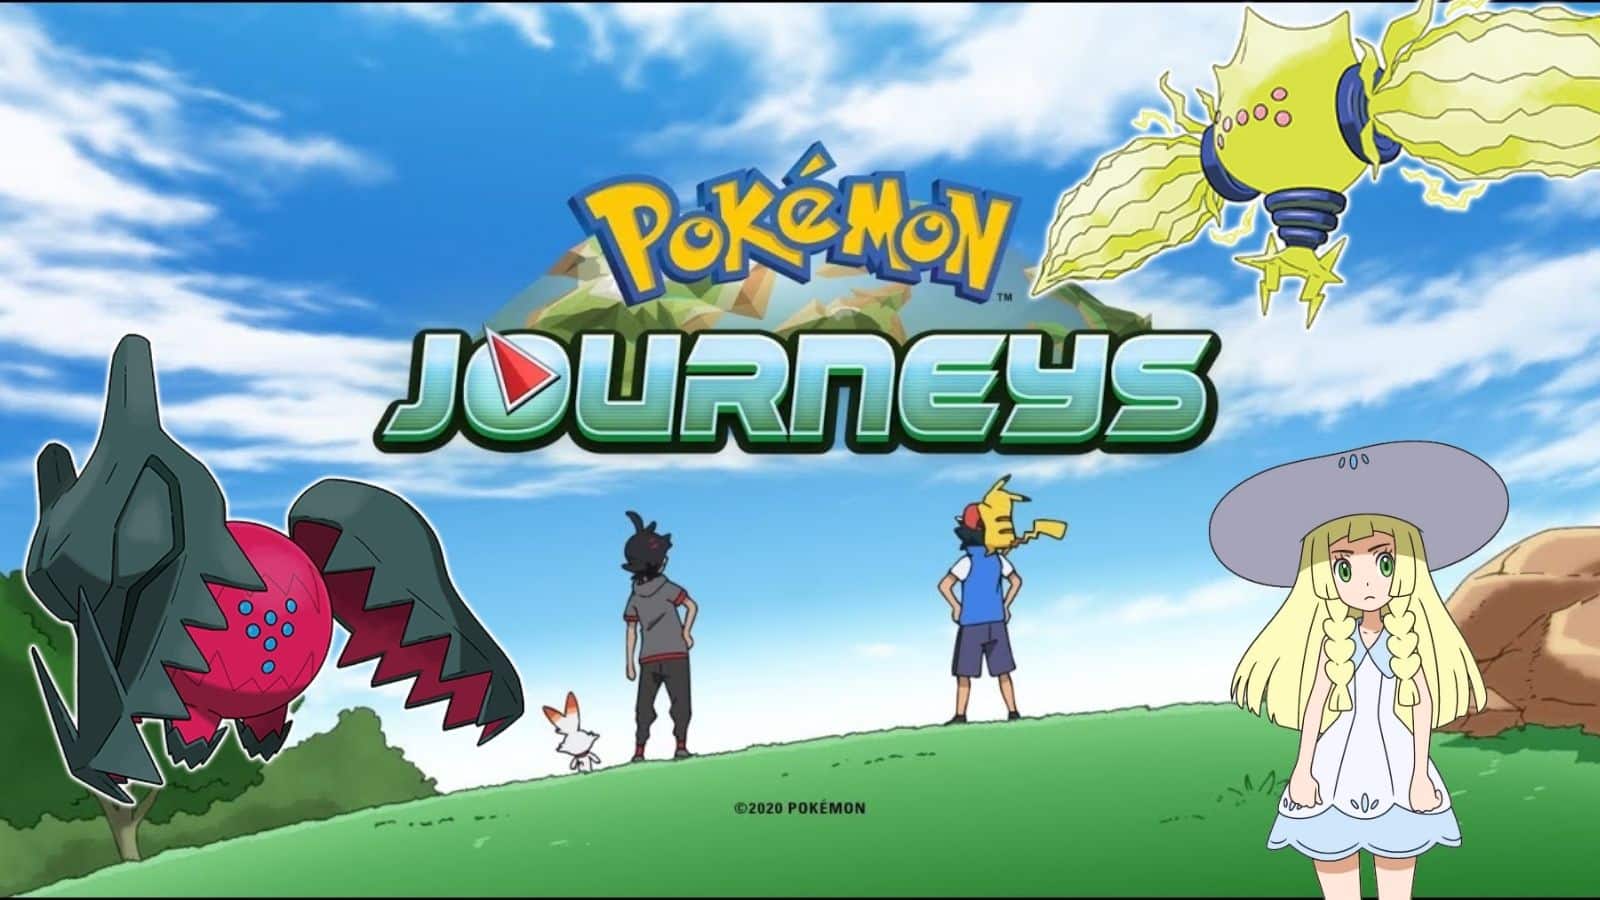 Pokemon Master Journeys to add Sword & Shield DLC, but not what you expect  - Dexerto